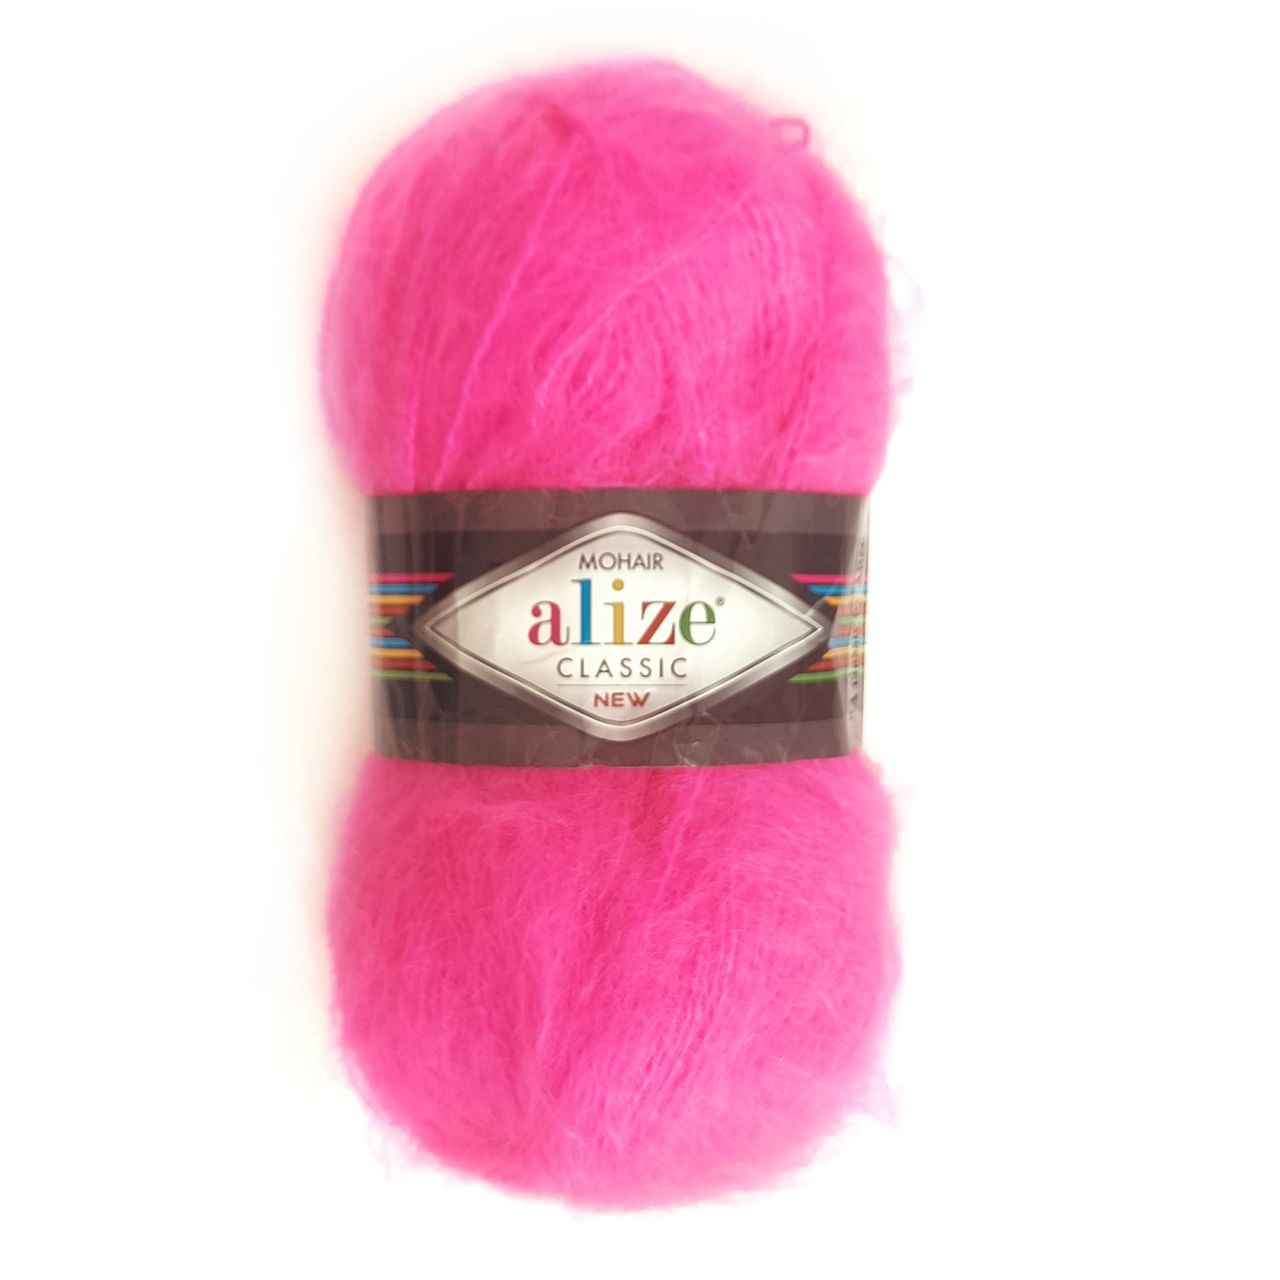 Alize Mohair classic new 157 розовый неон